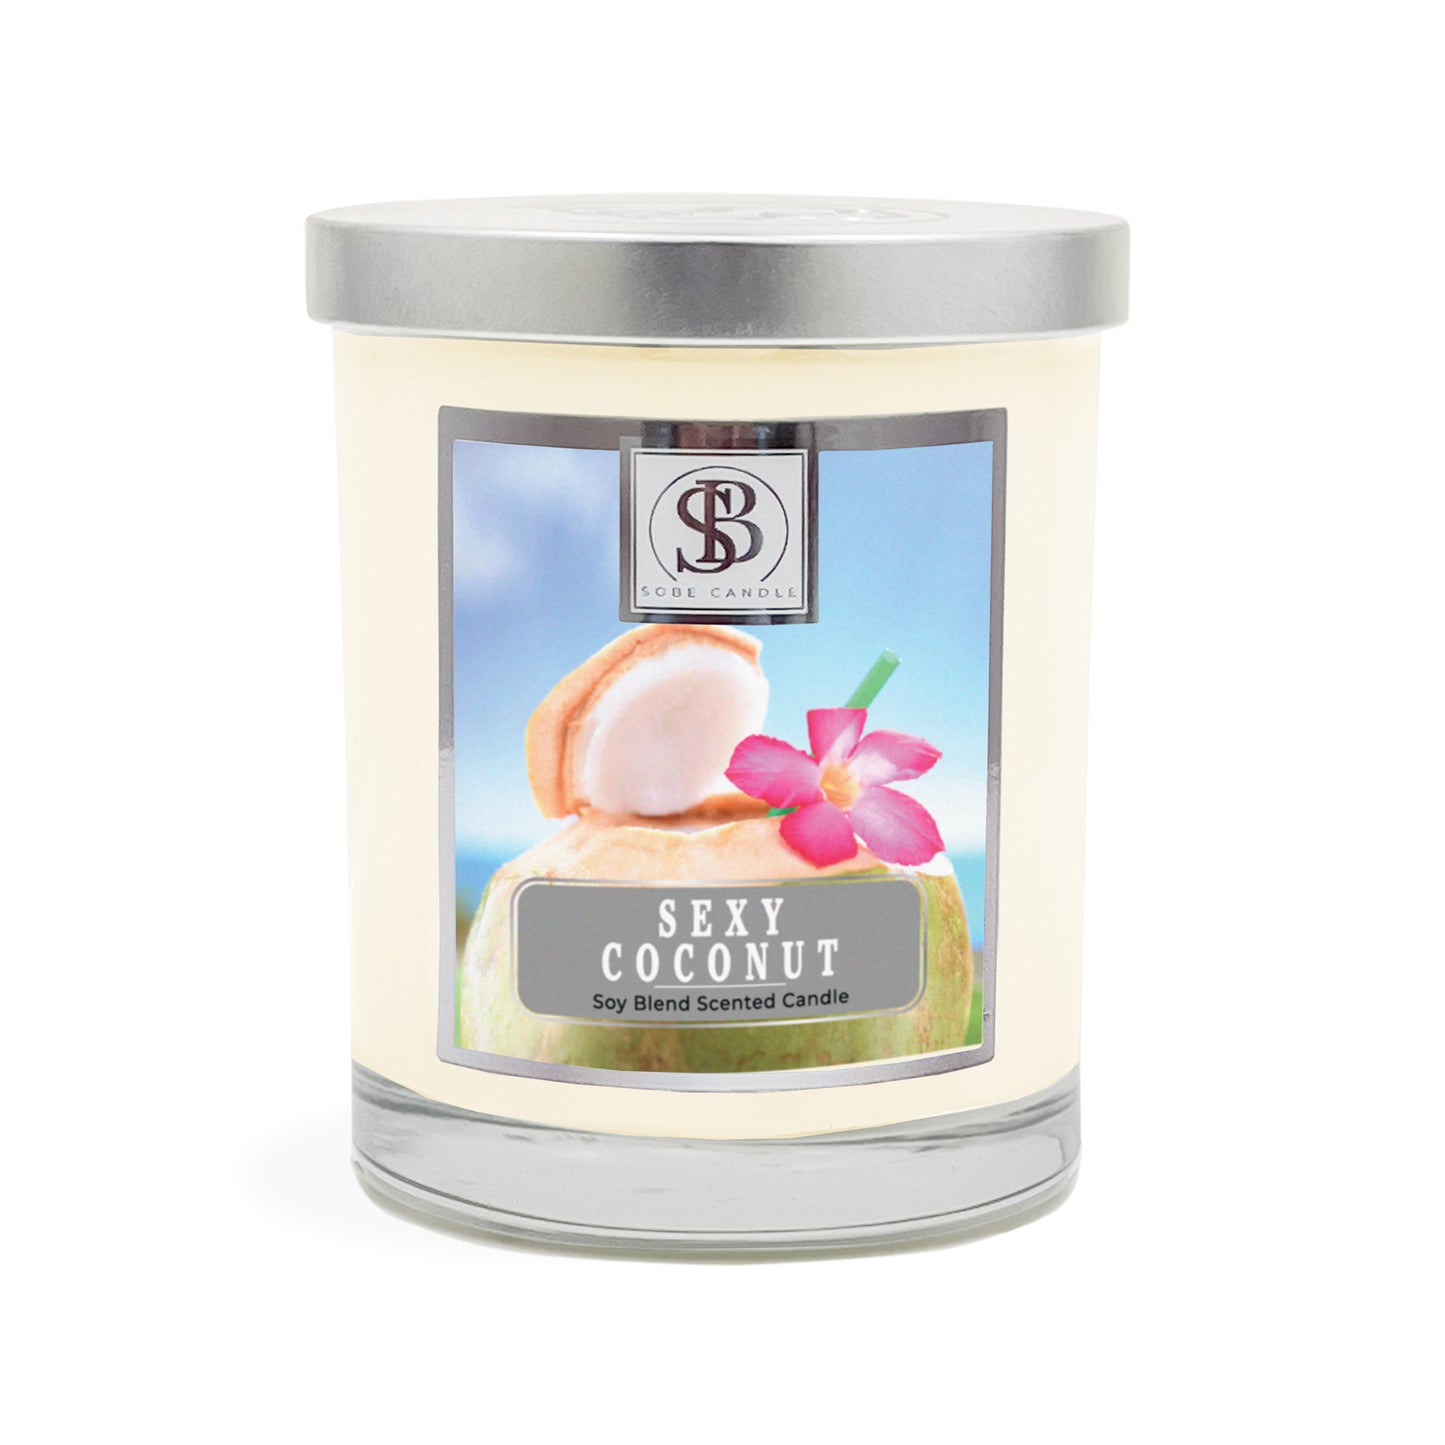 SEXY COCONUT | Soy Scented Candle 11 oz